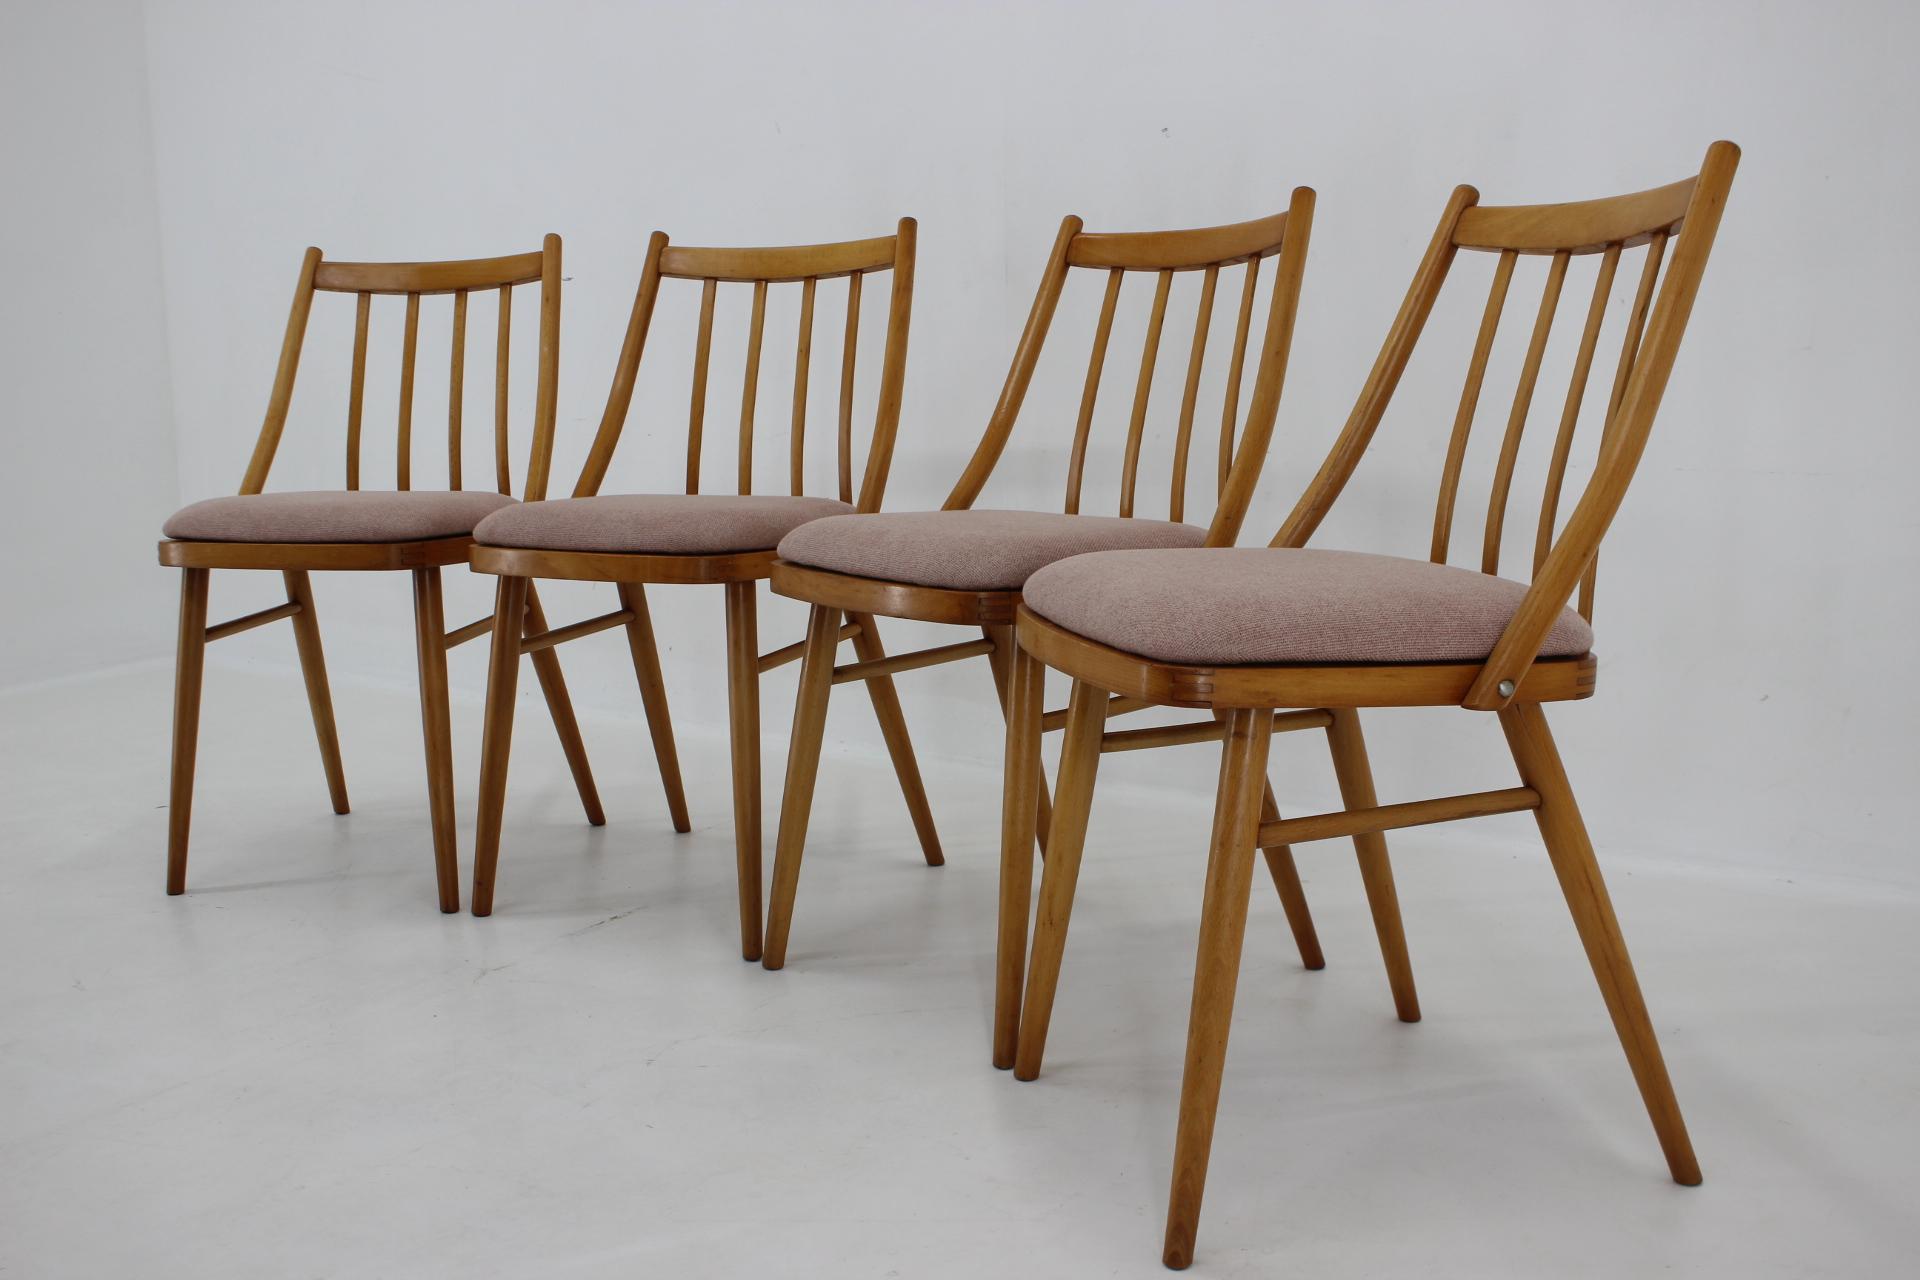 - repolished 
- newly upholstered 
- height of set 46 cm.